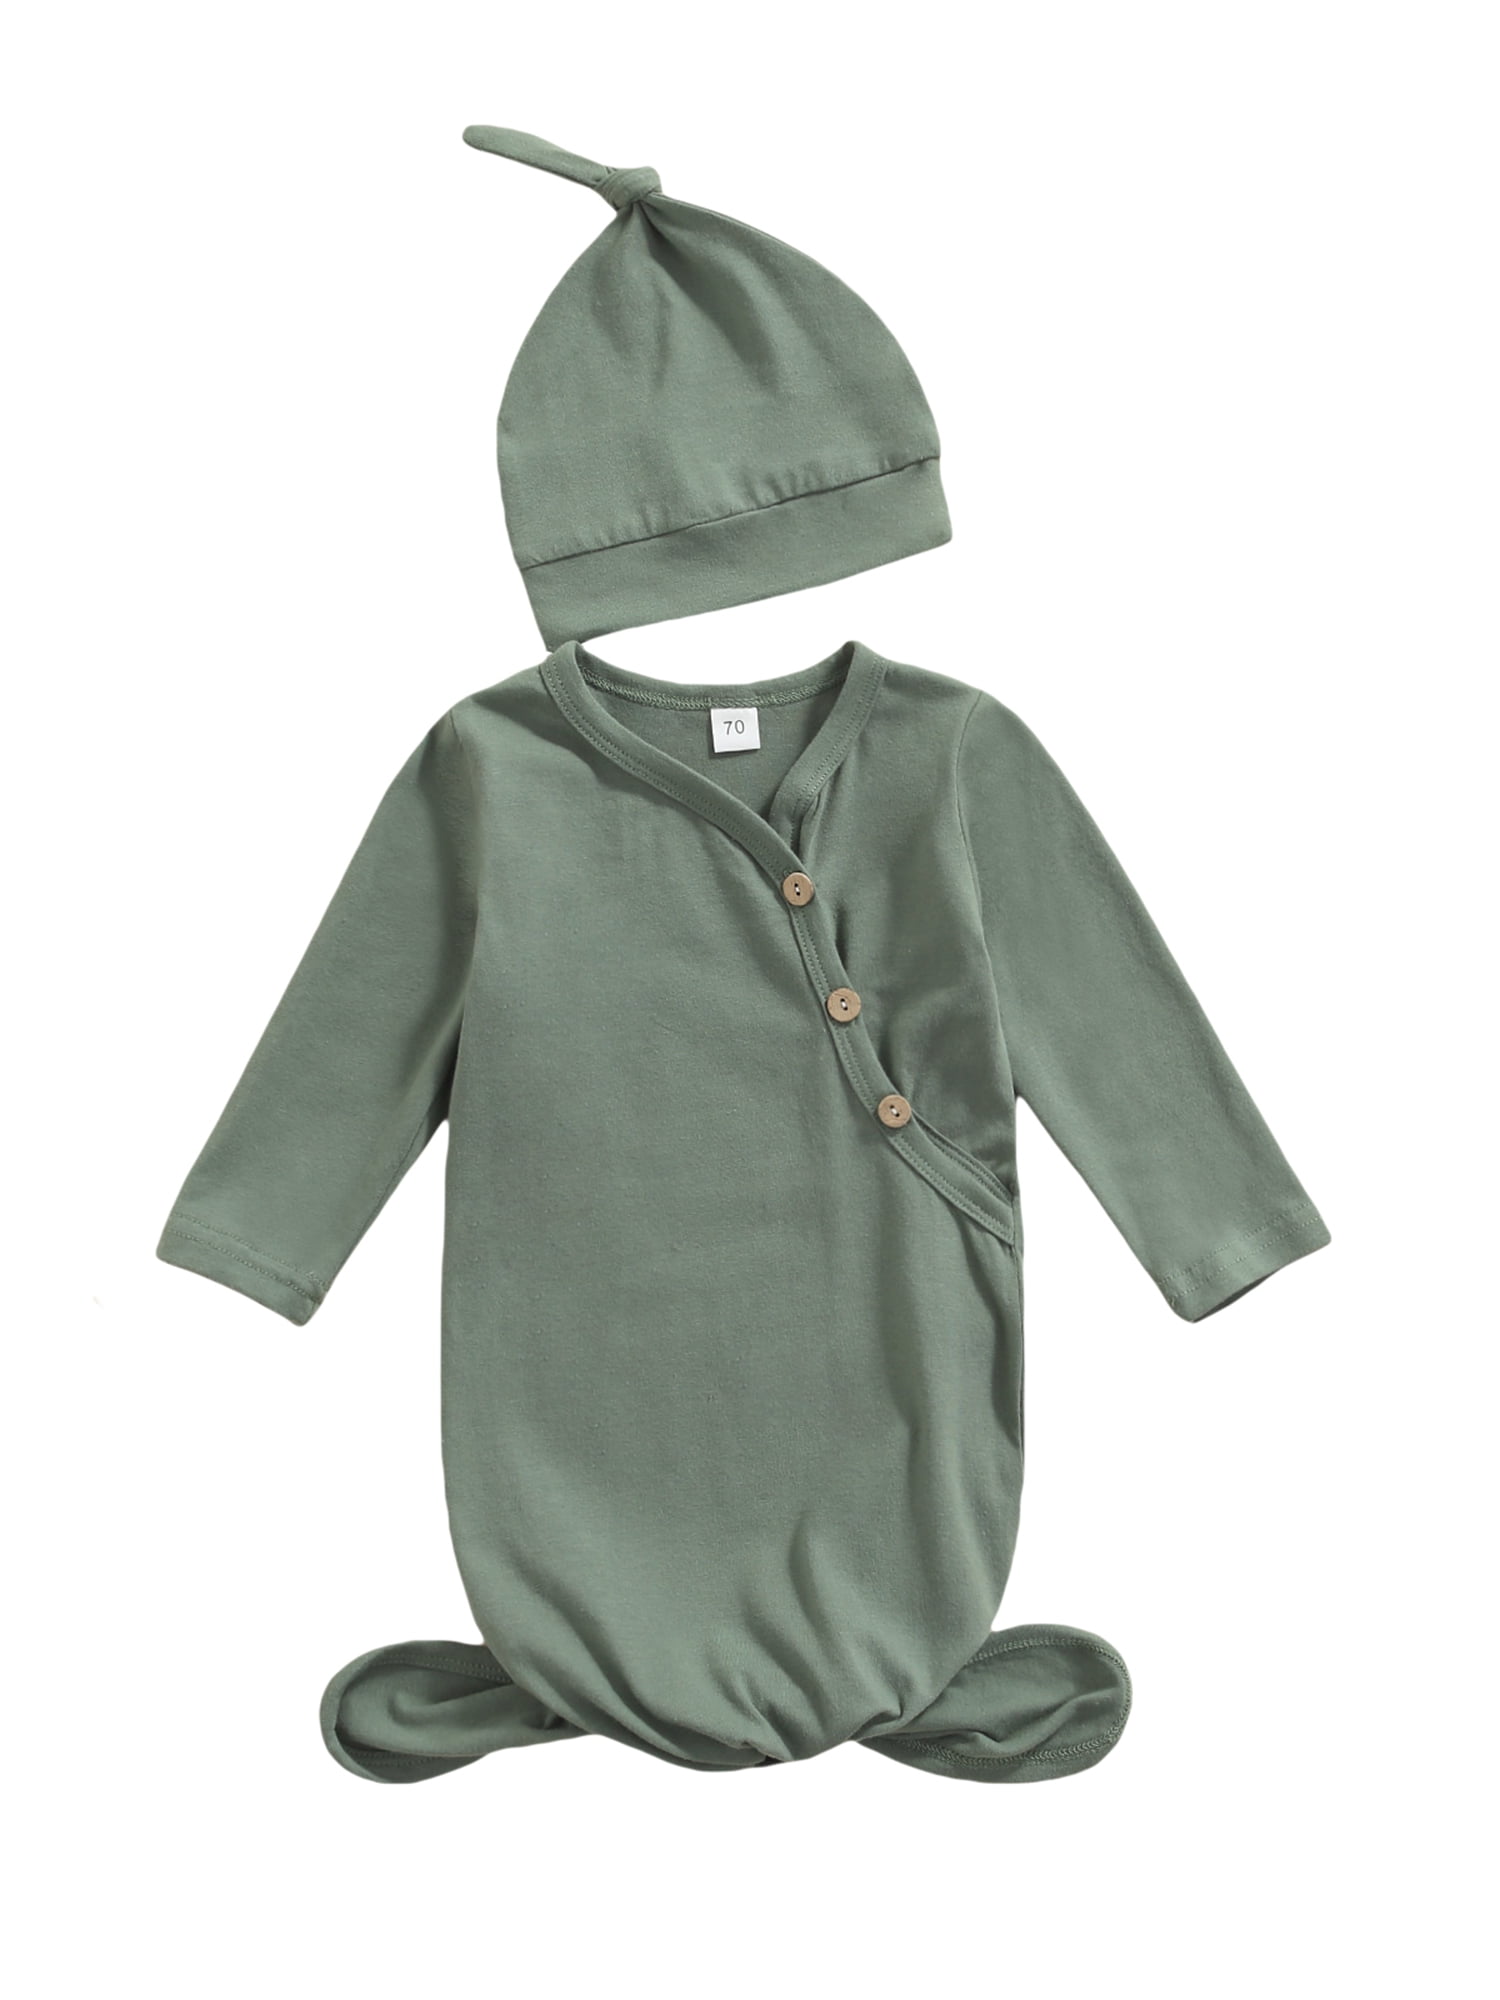 Baby Boy Clothes Online | Free Delivery Over £20 | Millie & Ralph